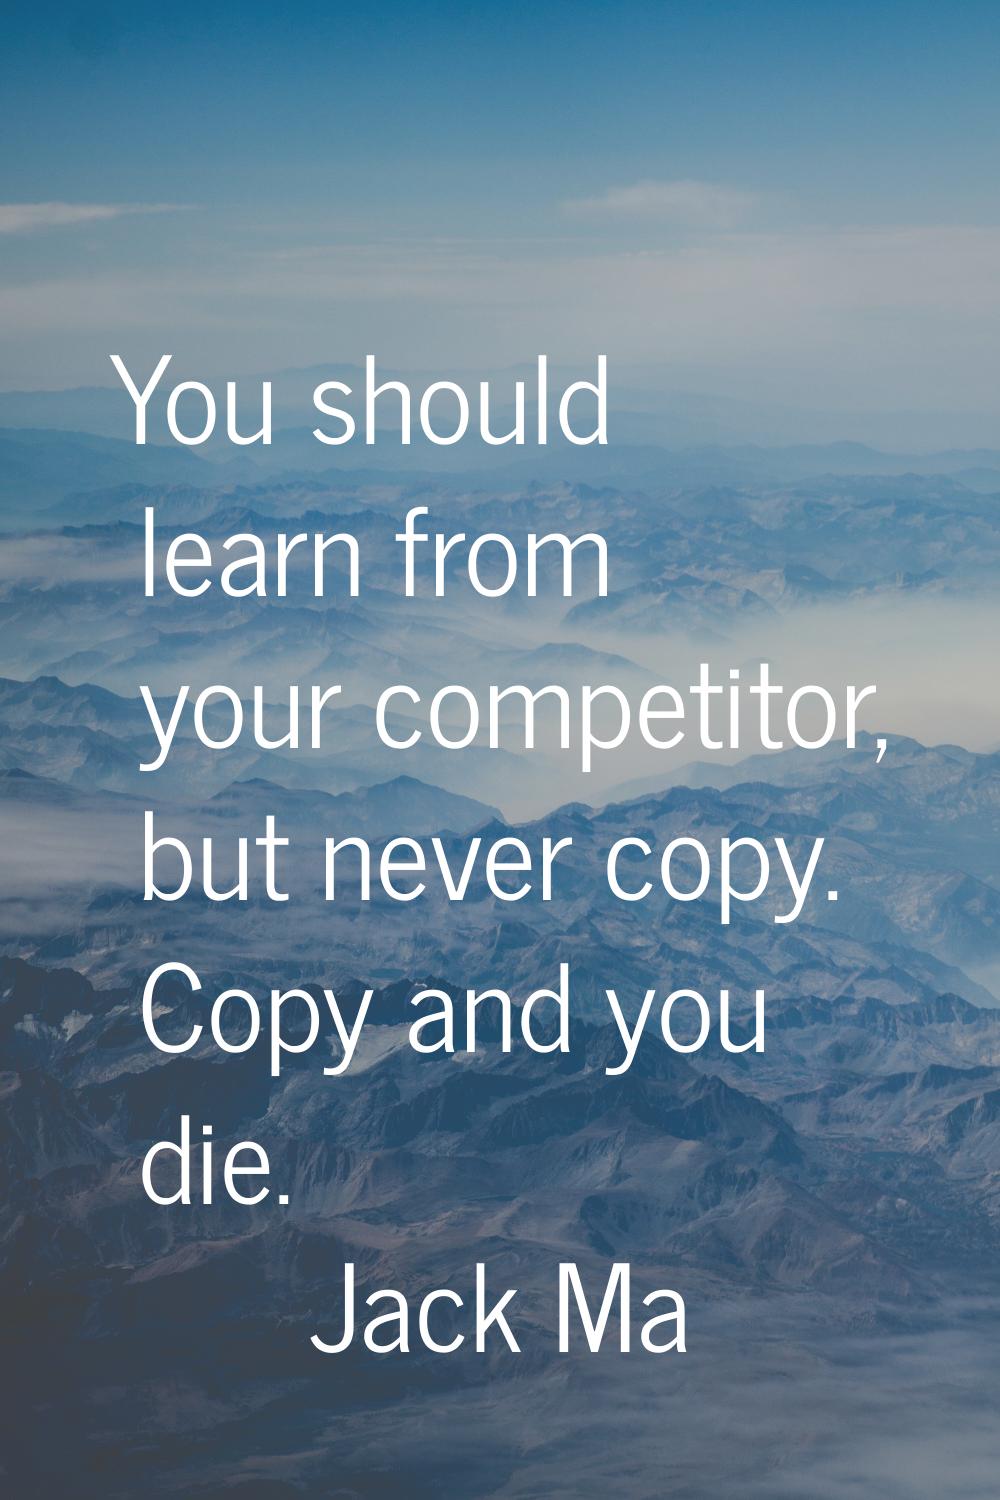 You should learn from your competitor, but never copy. Copy and you die.